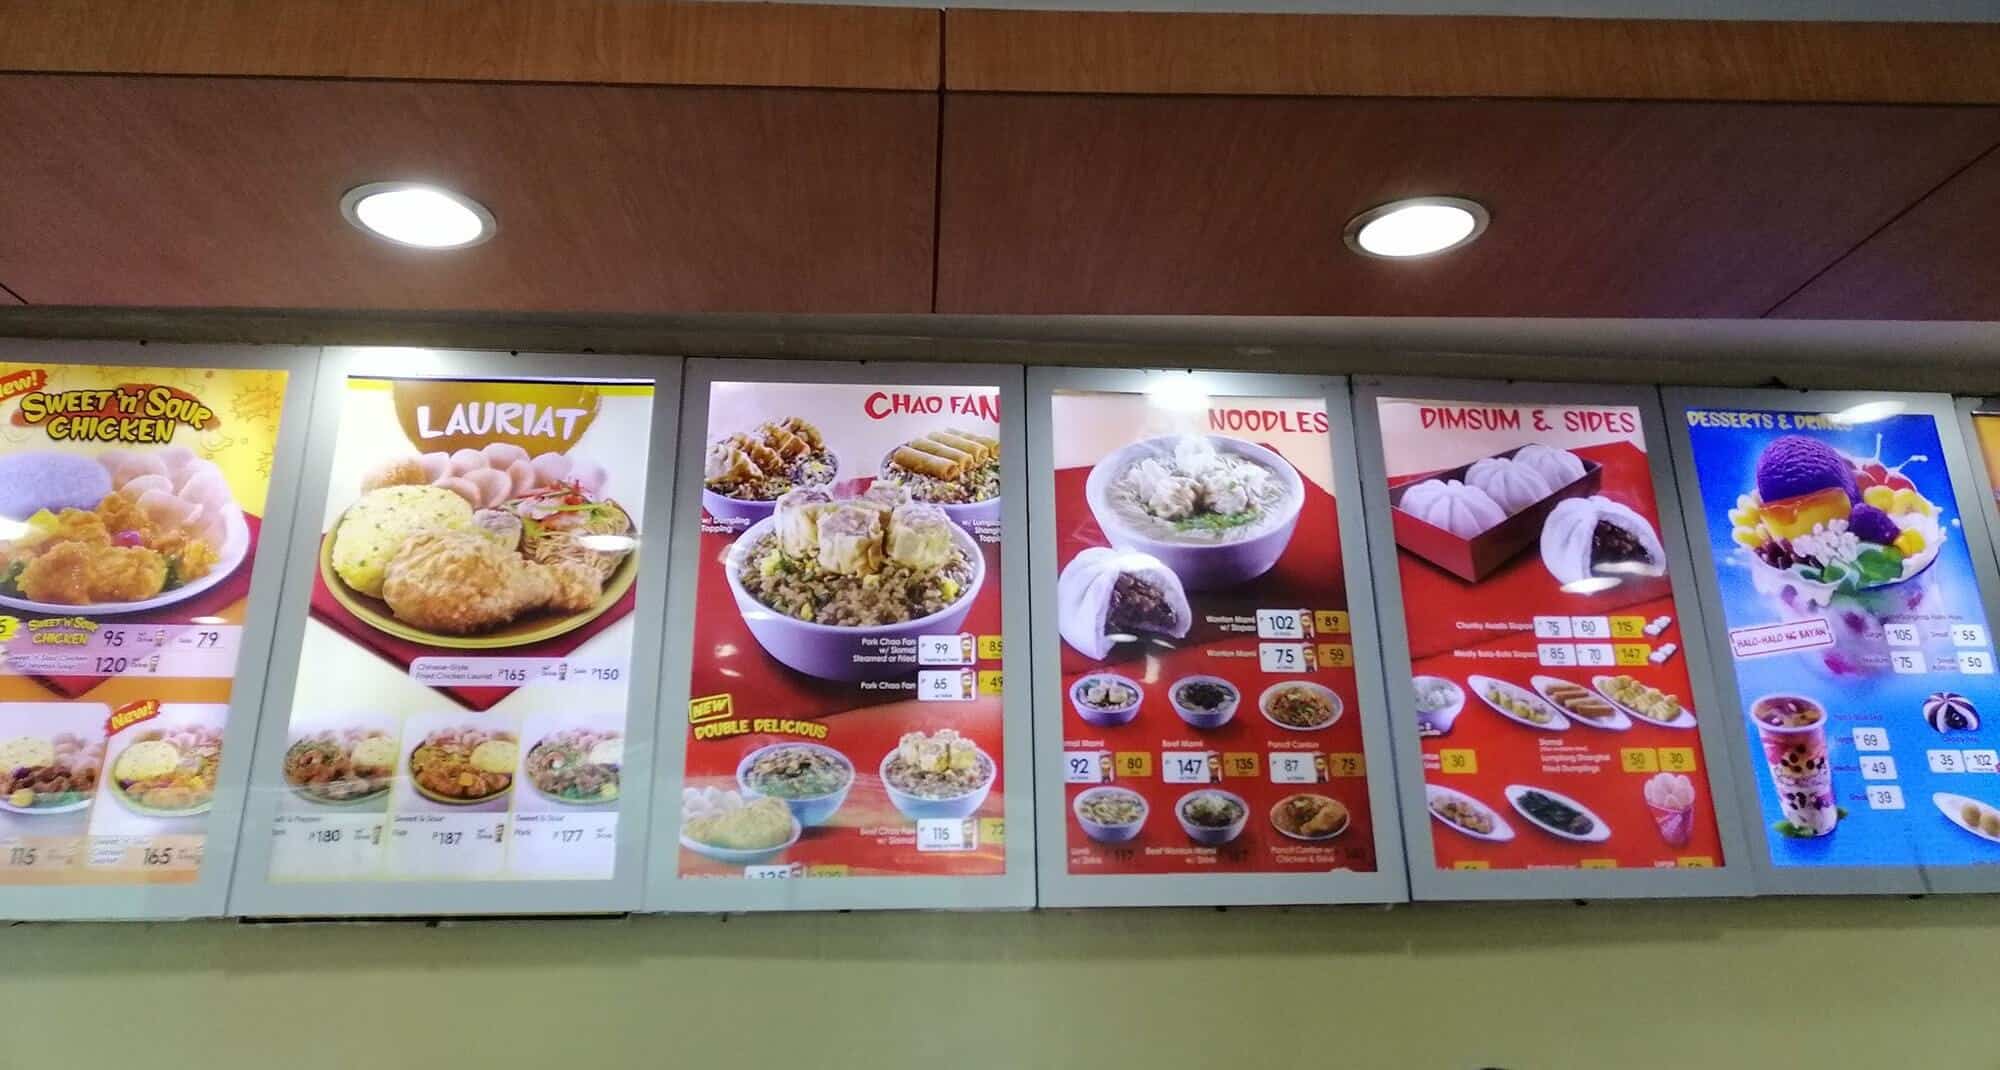 Chao Fan And Lauriat On The Menu At Chowking